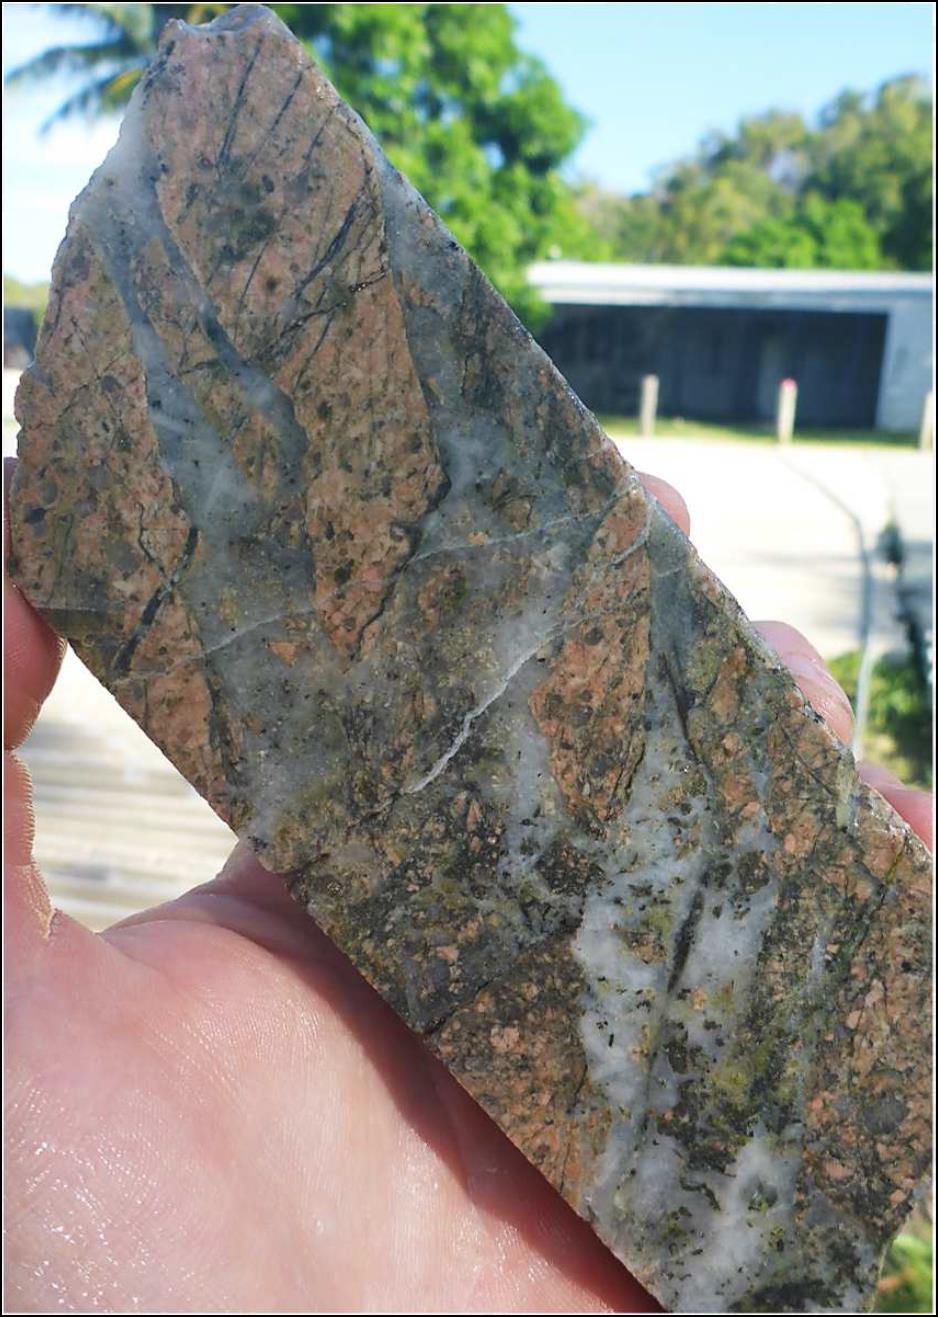 HORN ISLAND OLD MINE GEOLOGY Hand specimen showing tensional shattering of the brittle intrusive rocks with jigsaw fit breccia clasts cemented in place